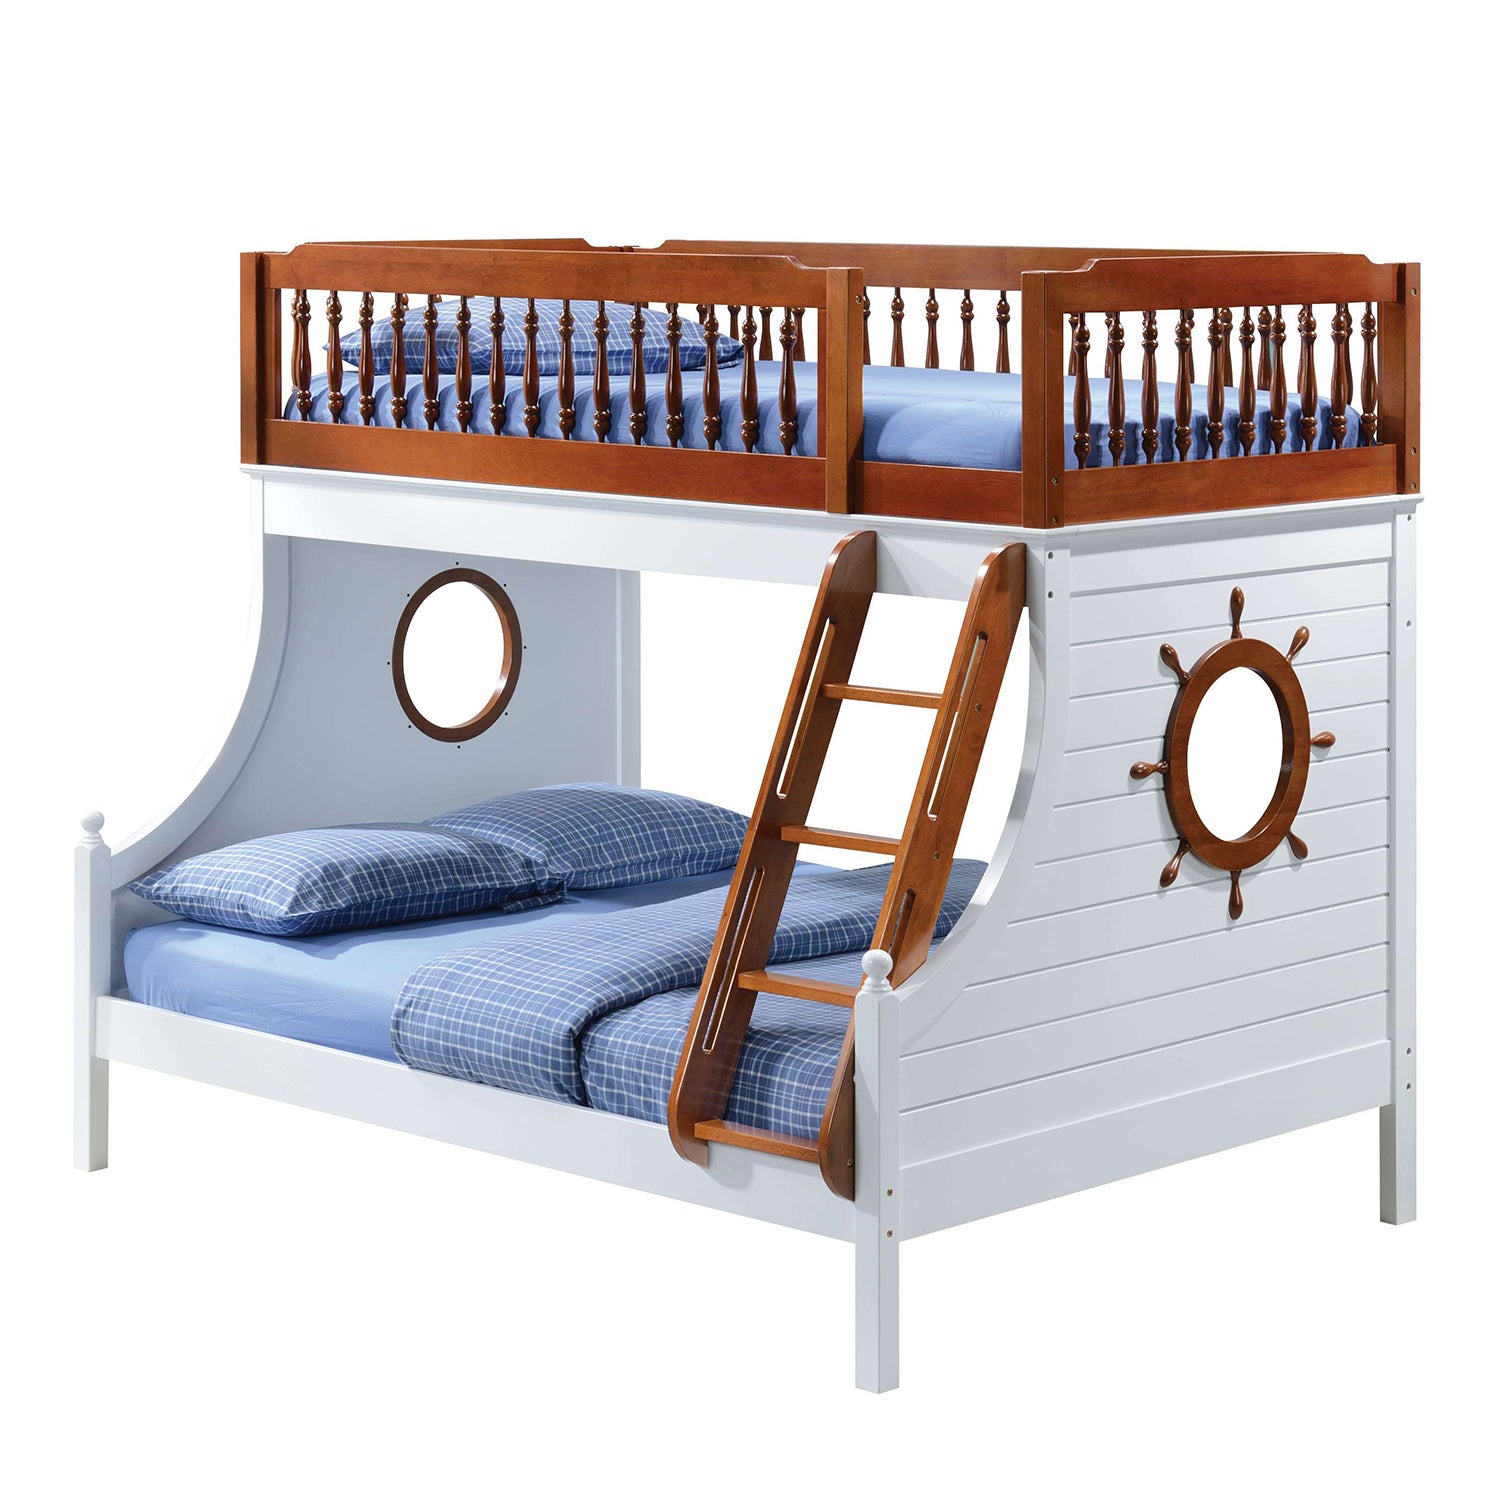 80" X 58" X 69" Twin Over Full Oak And White Bunk Bed Default Title